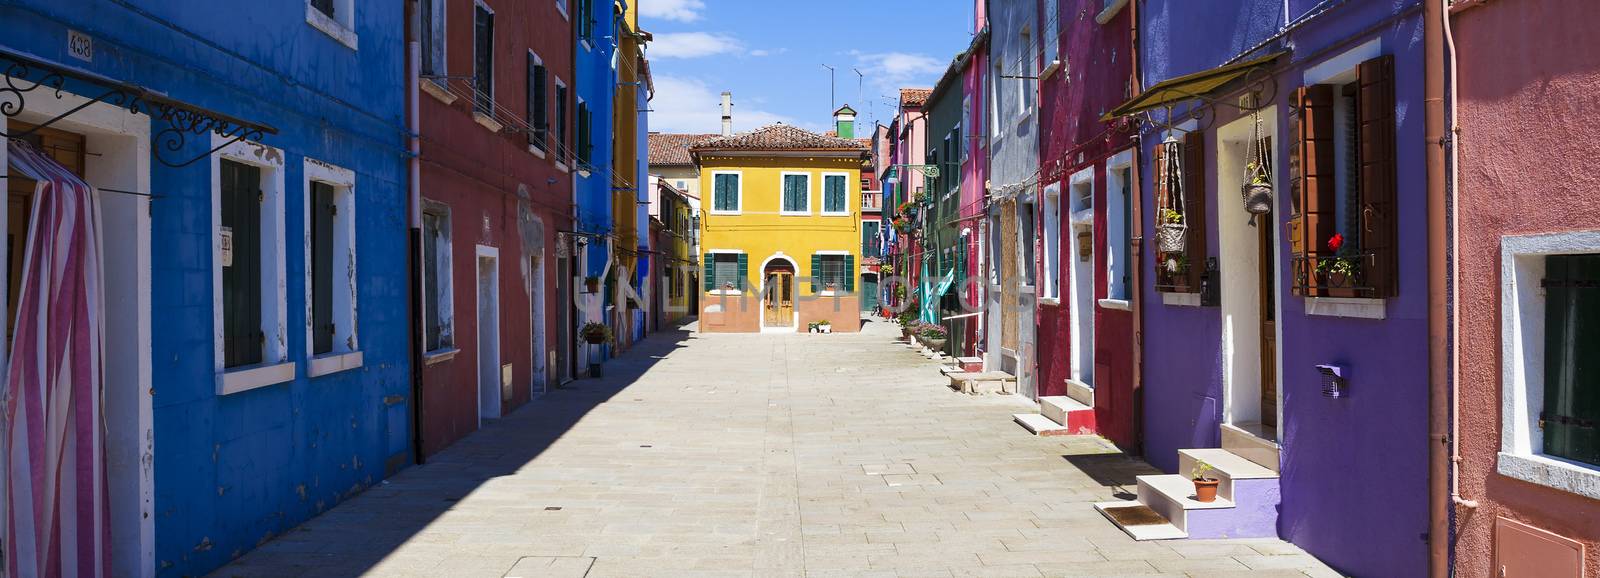 Panoramic view of Colorful street in Burano by vwalakte